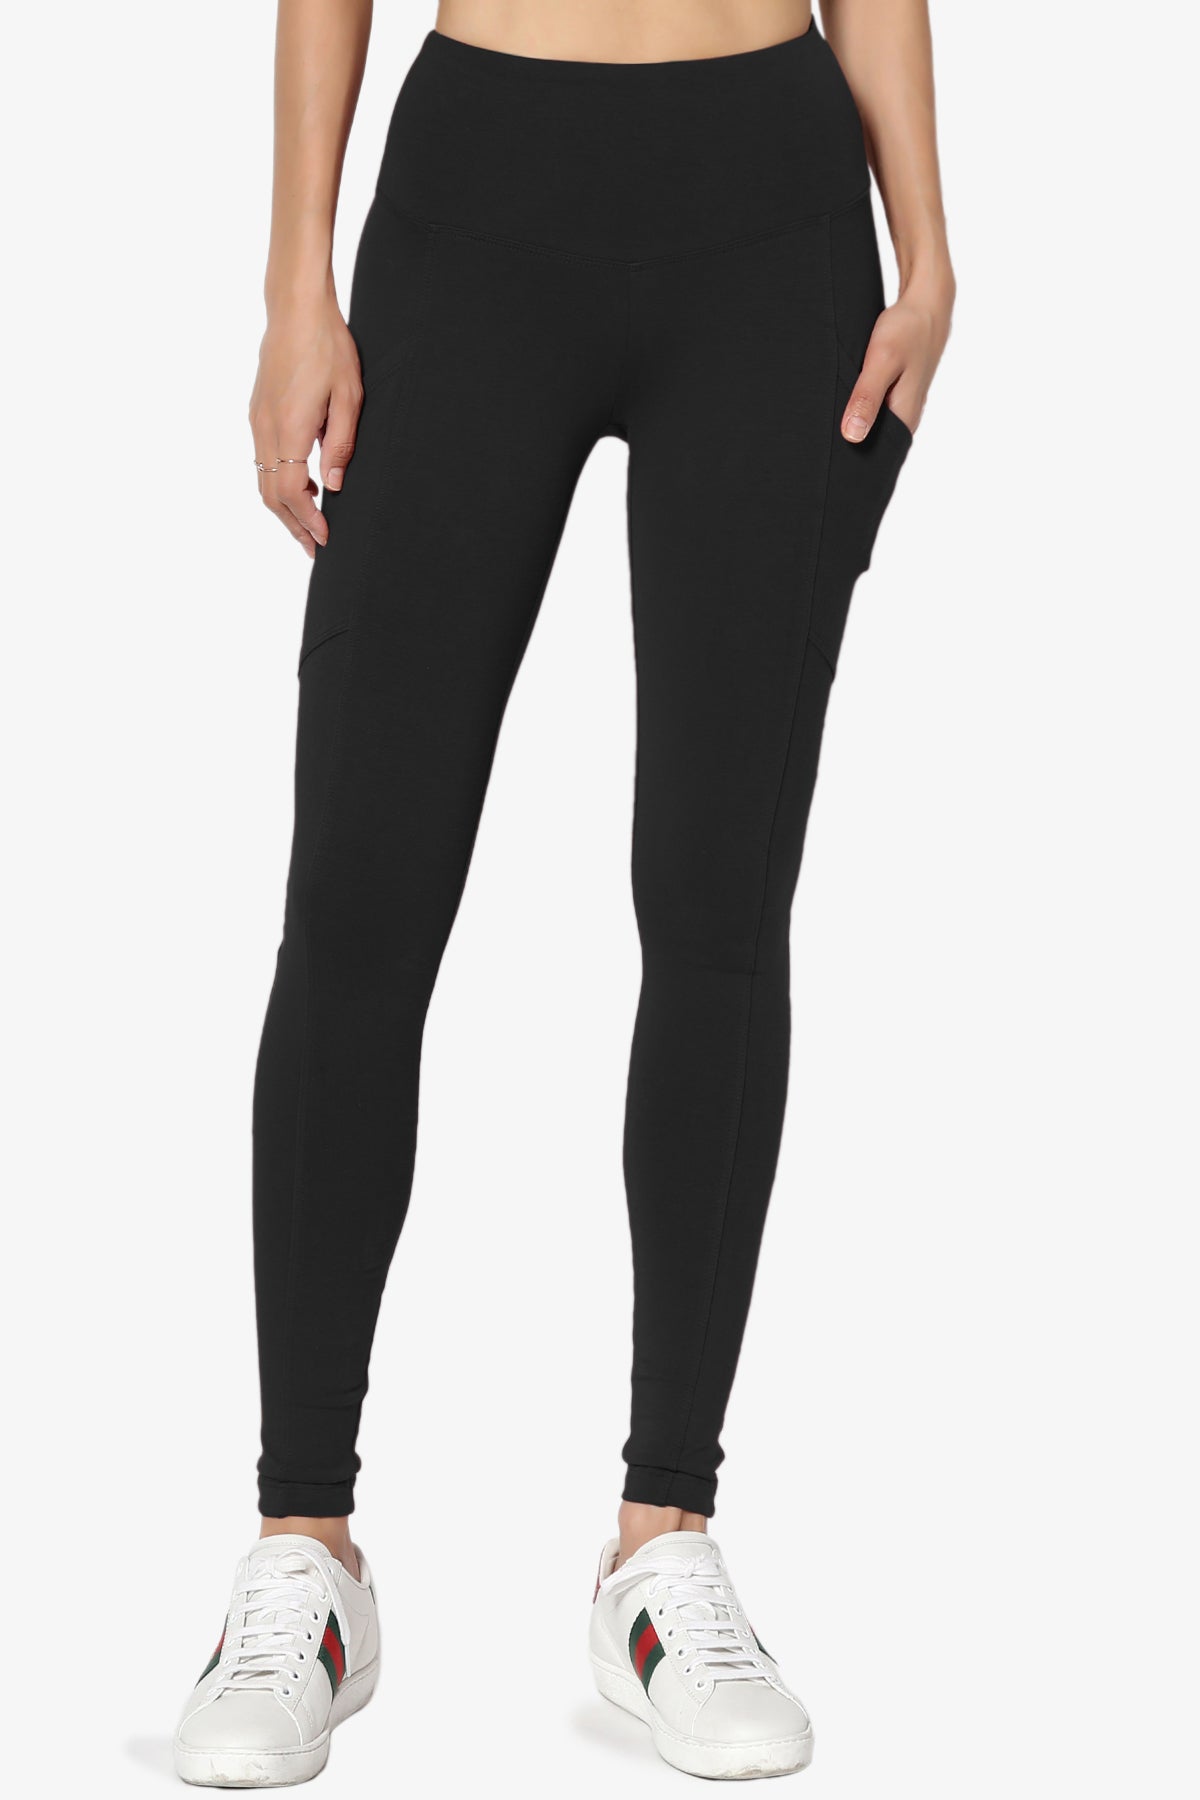 Ansley Luxe Cotton Leggings with Pockets BLACK_3